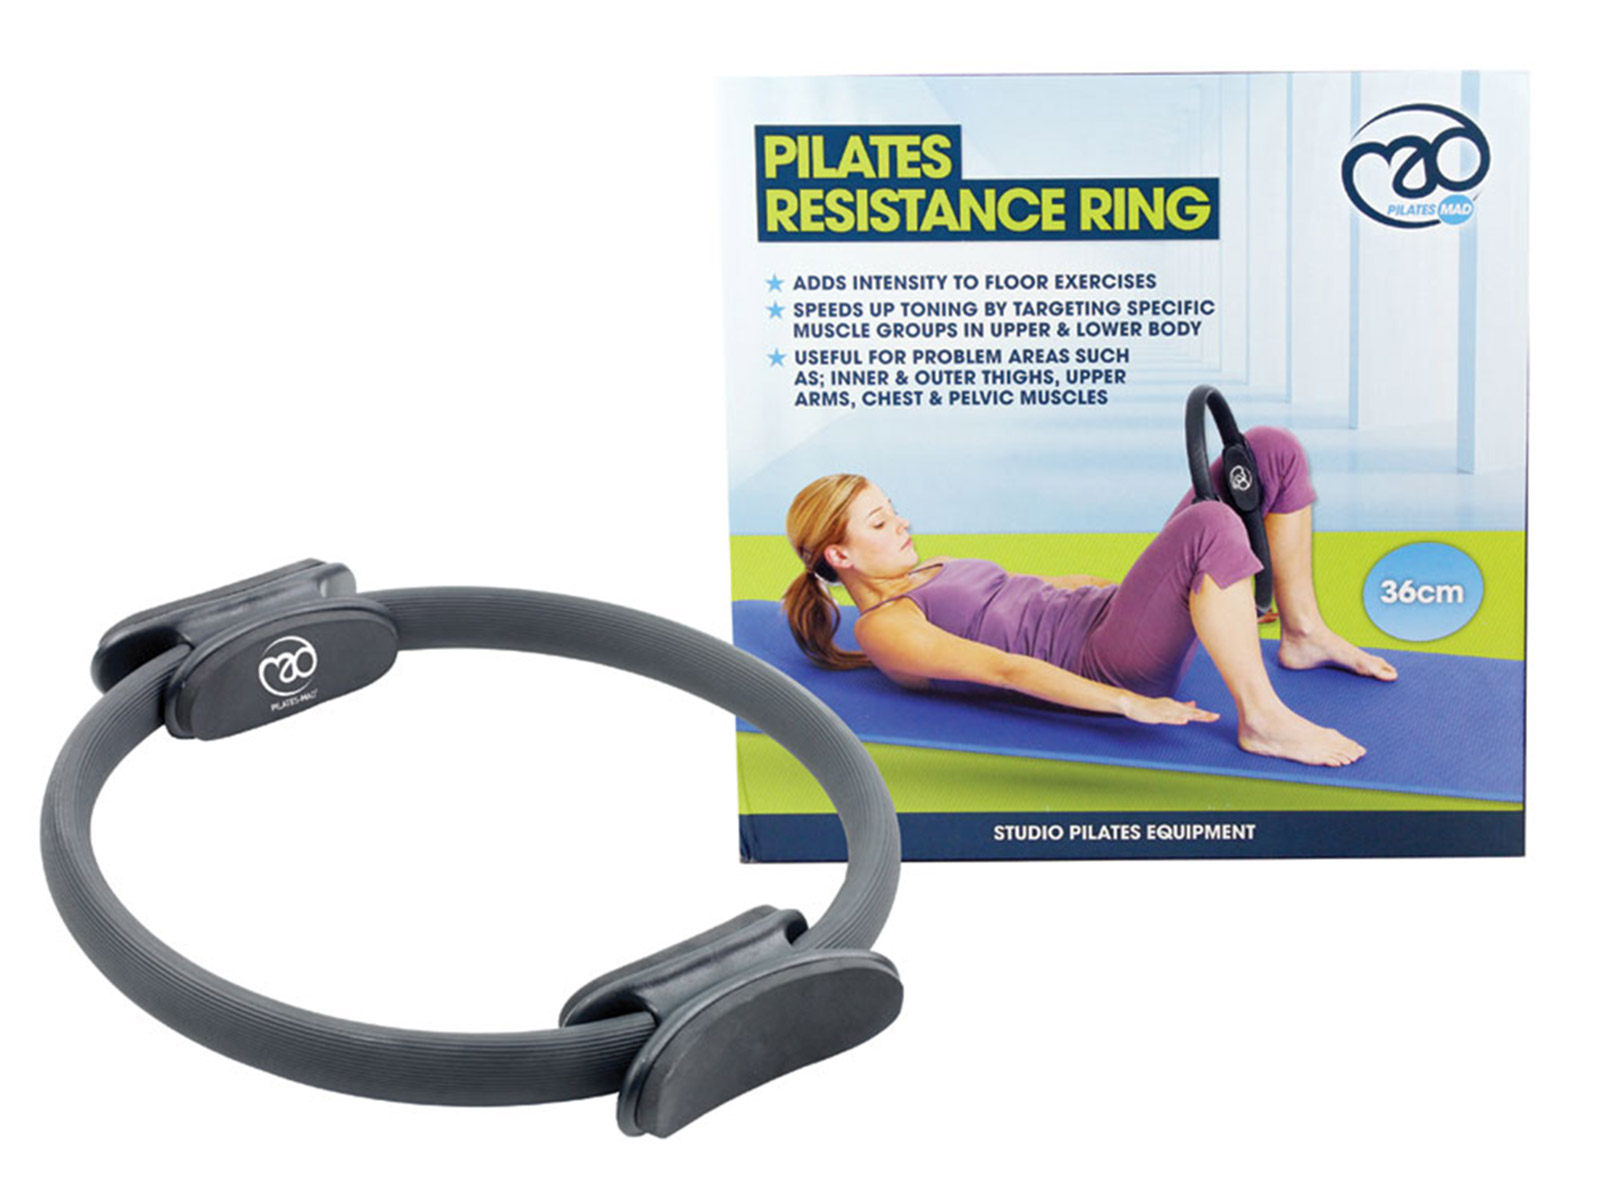 Buy RitFit Pilates Ring Power Resistance Full Body Toning Fitness Circle -  with Carrying Bag and Bonus eBook(Black) Online at Low Prices in India -  Amazon.in